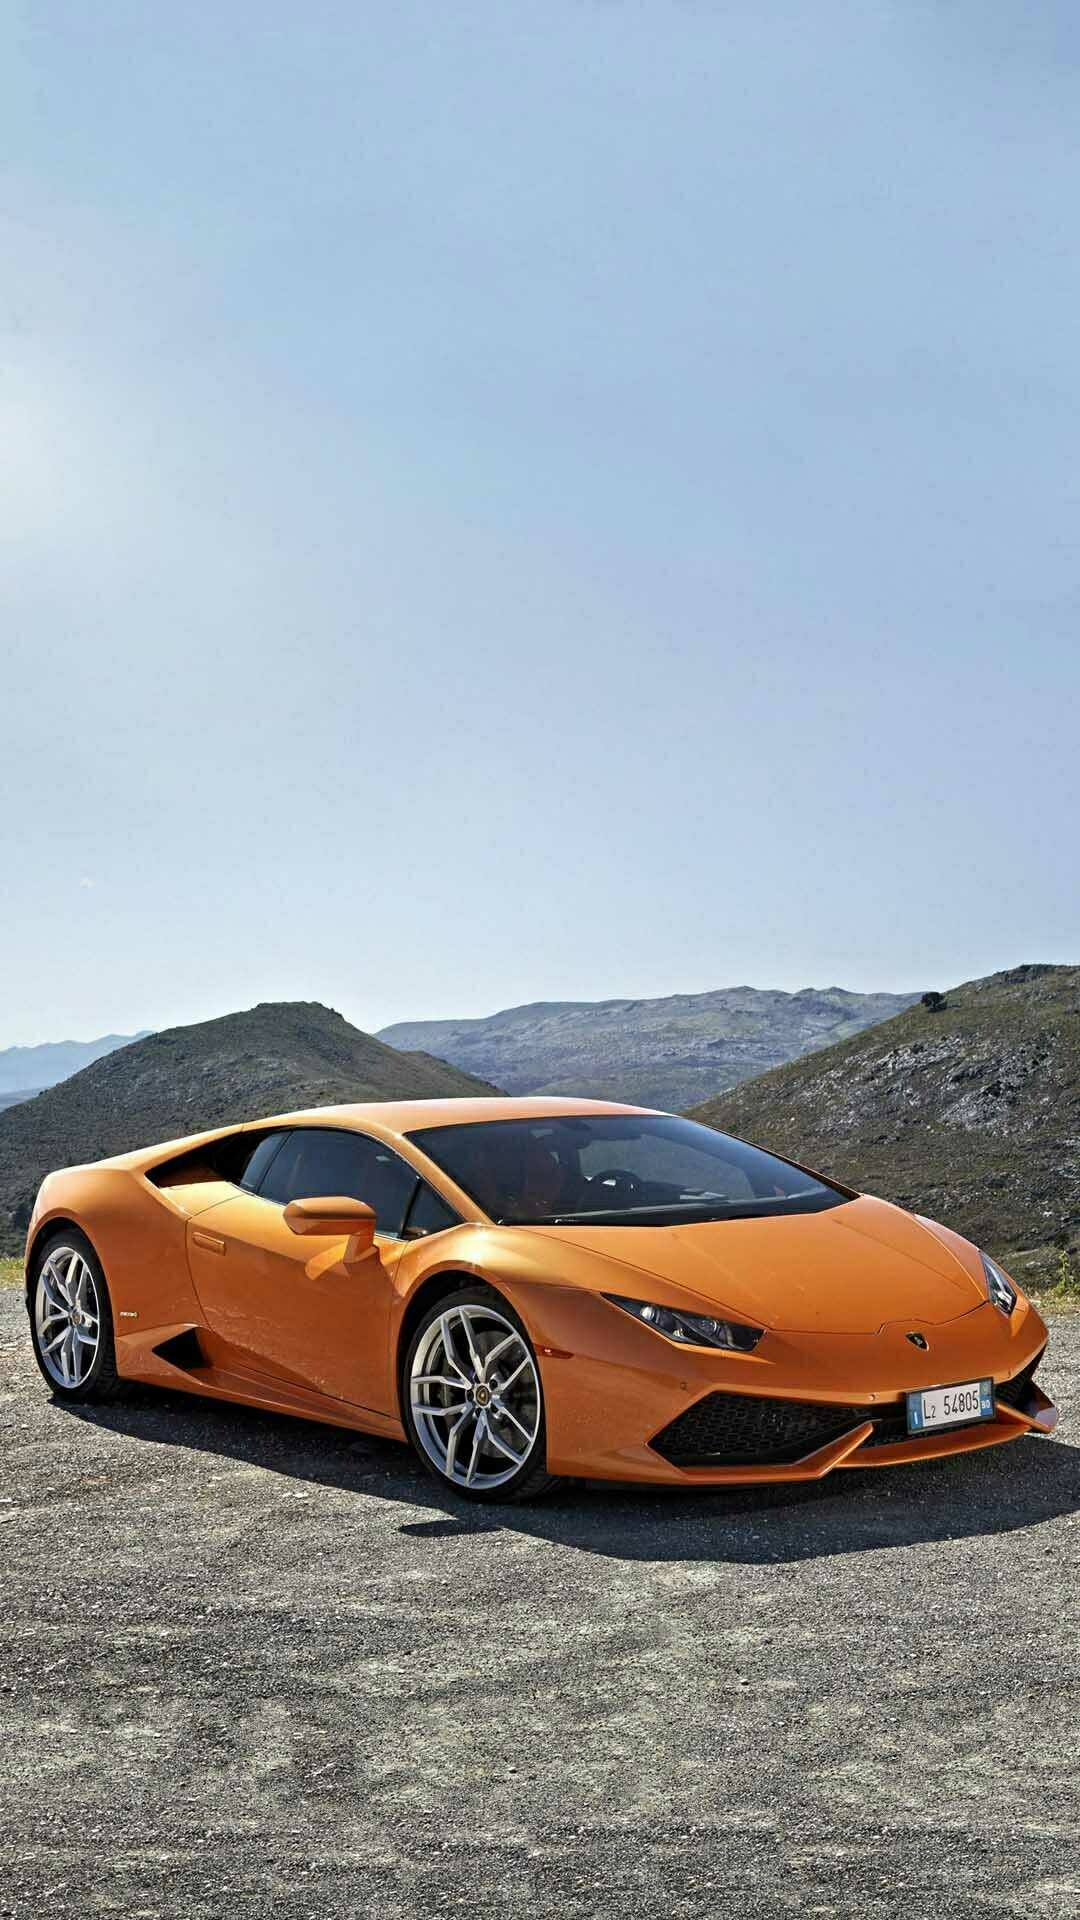 Lamborghini: The Murcielago, the culmination of the L147 project, replaced a decade-old Diablo flagship, Huracan. 1080x1920 Full HD Background.